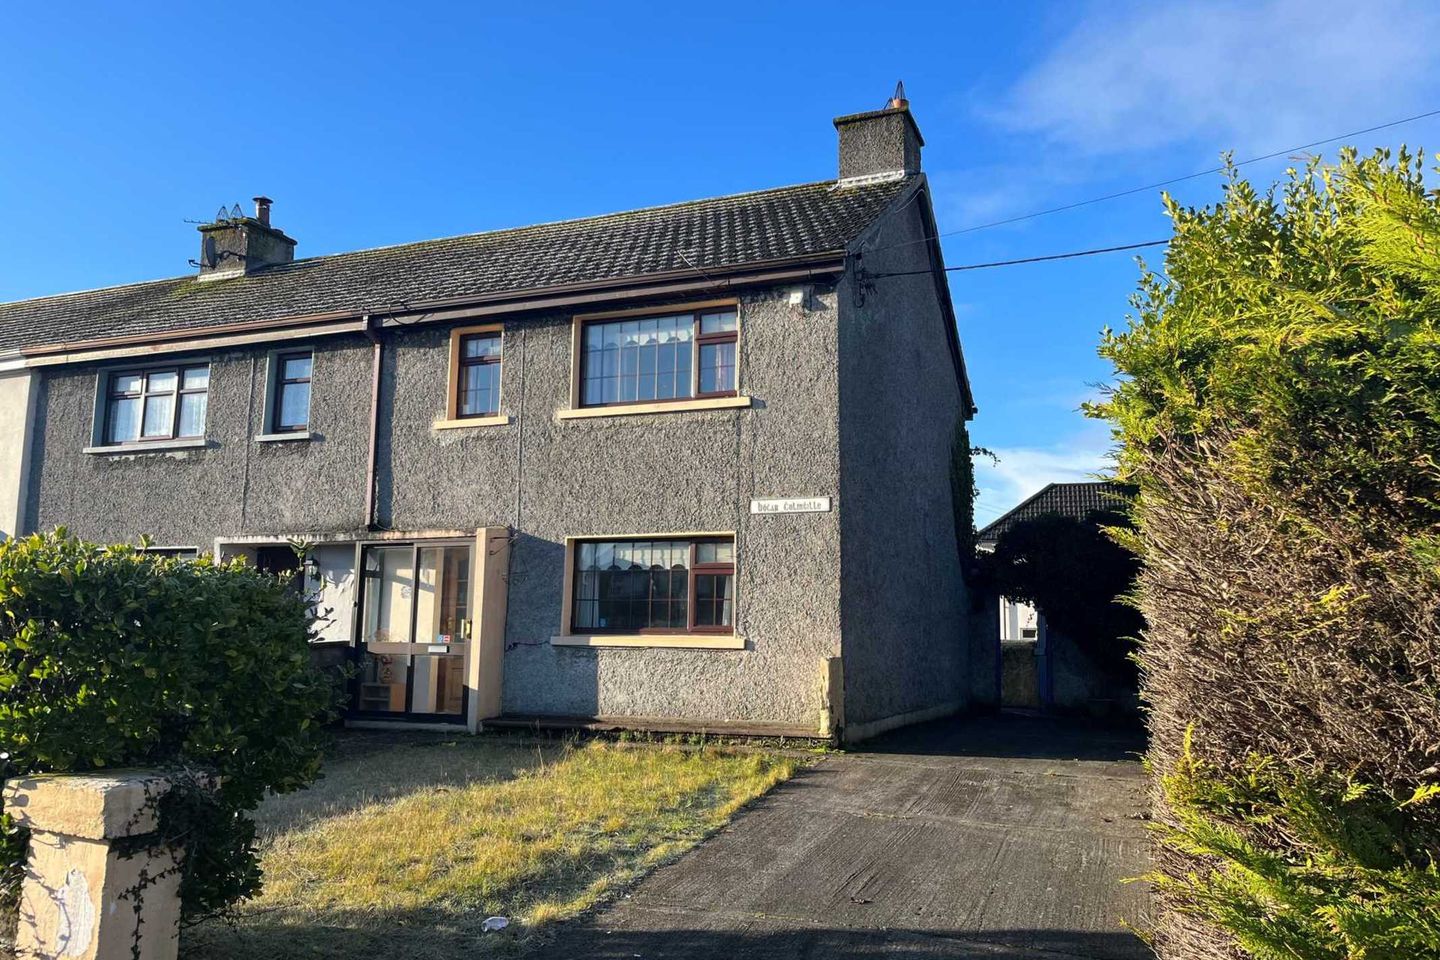 40 Colmcille Road, Shantalla, Co. Galway